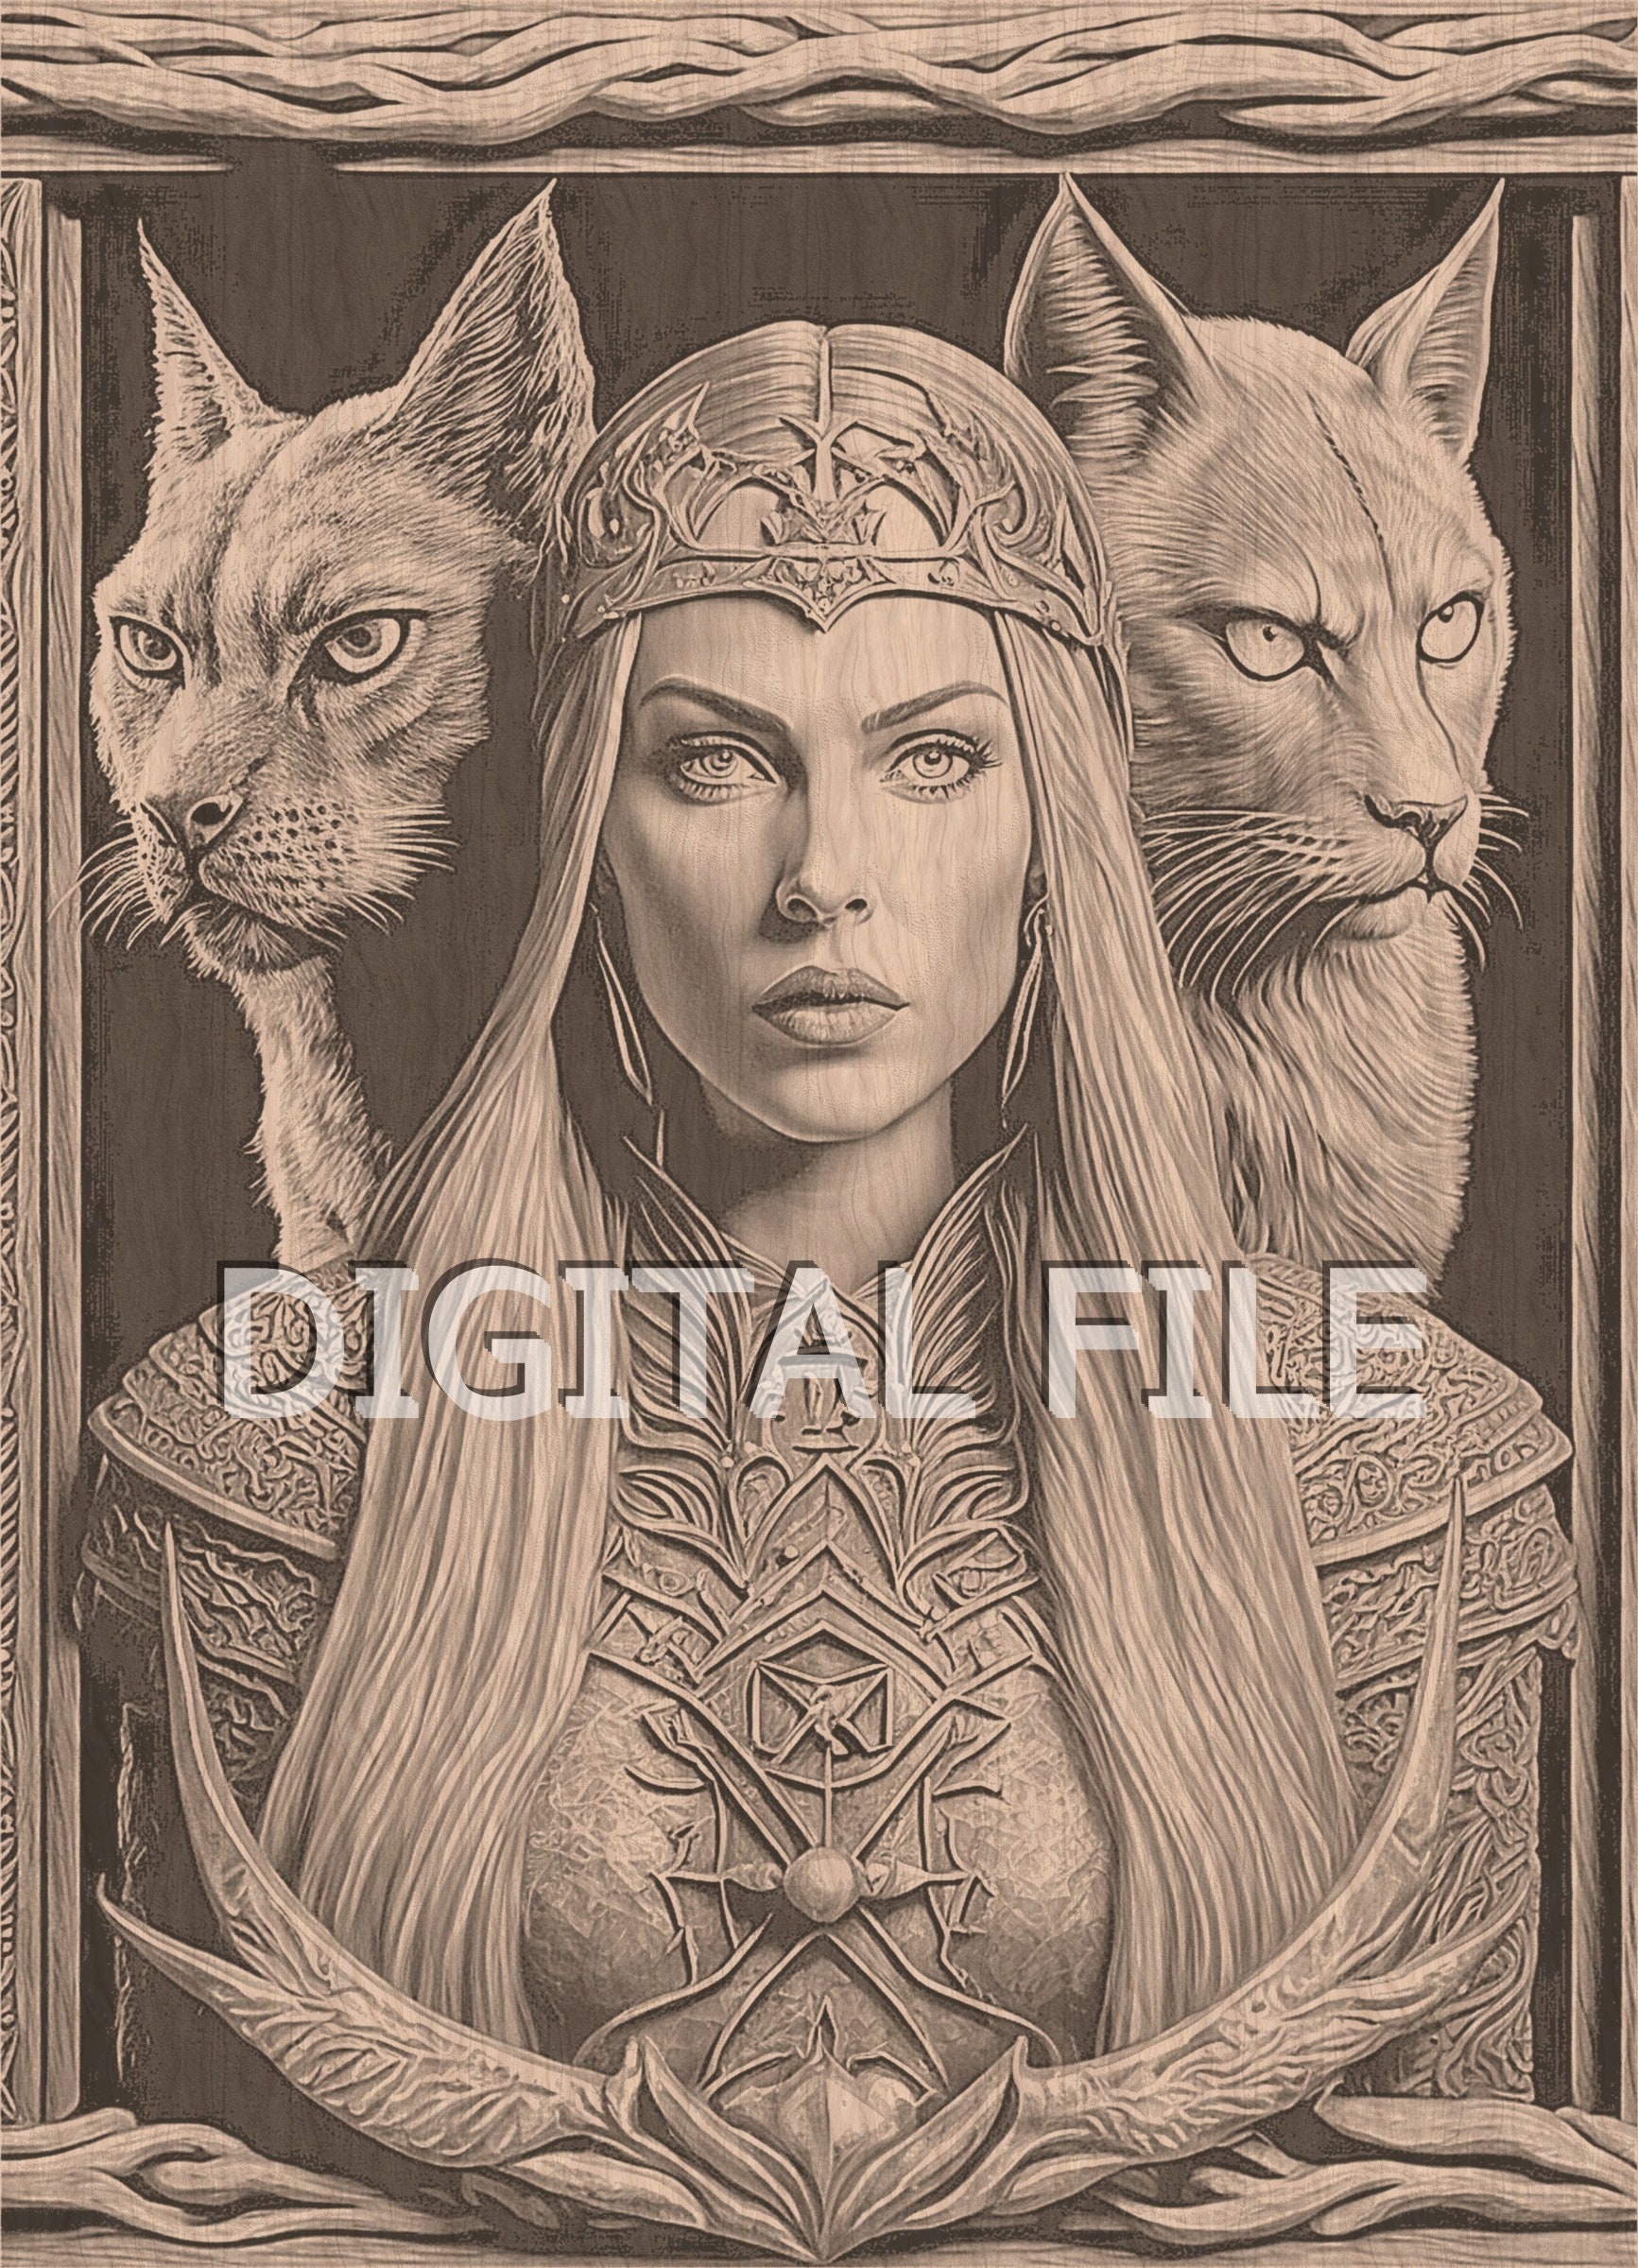 Norse Goddess Frigg Nfrigg (Freya) In Norse Mythology The Sister Of Frey  And Wife Of Odin Goddess Of Love Marriage And The Dead Poster Print by (24  x